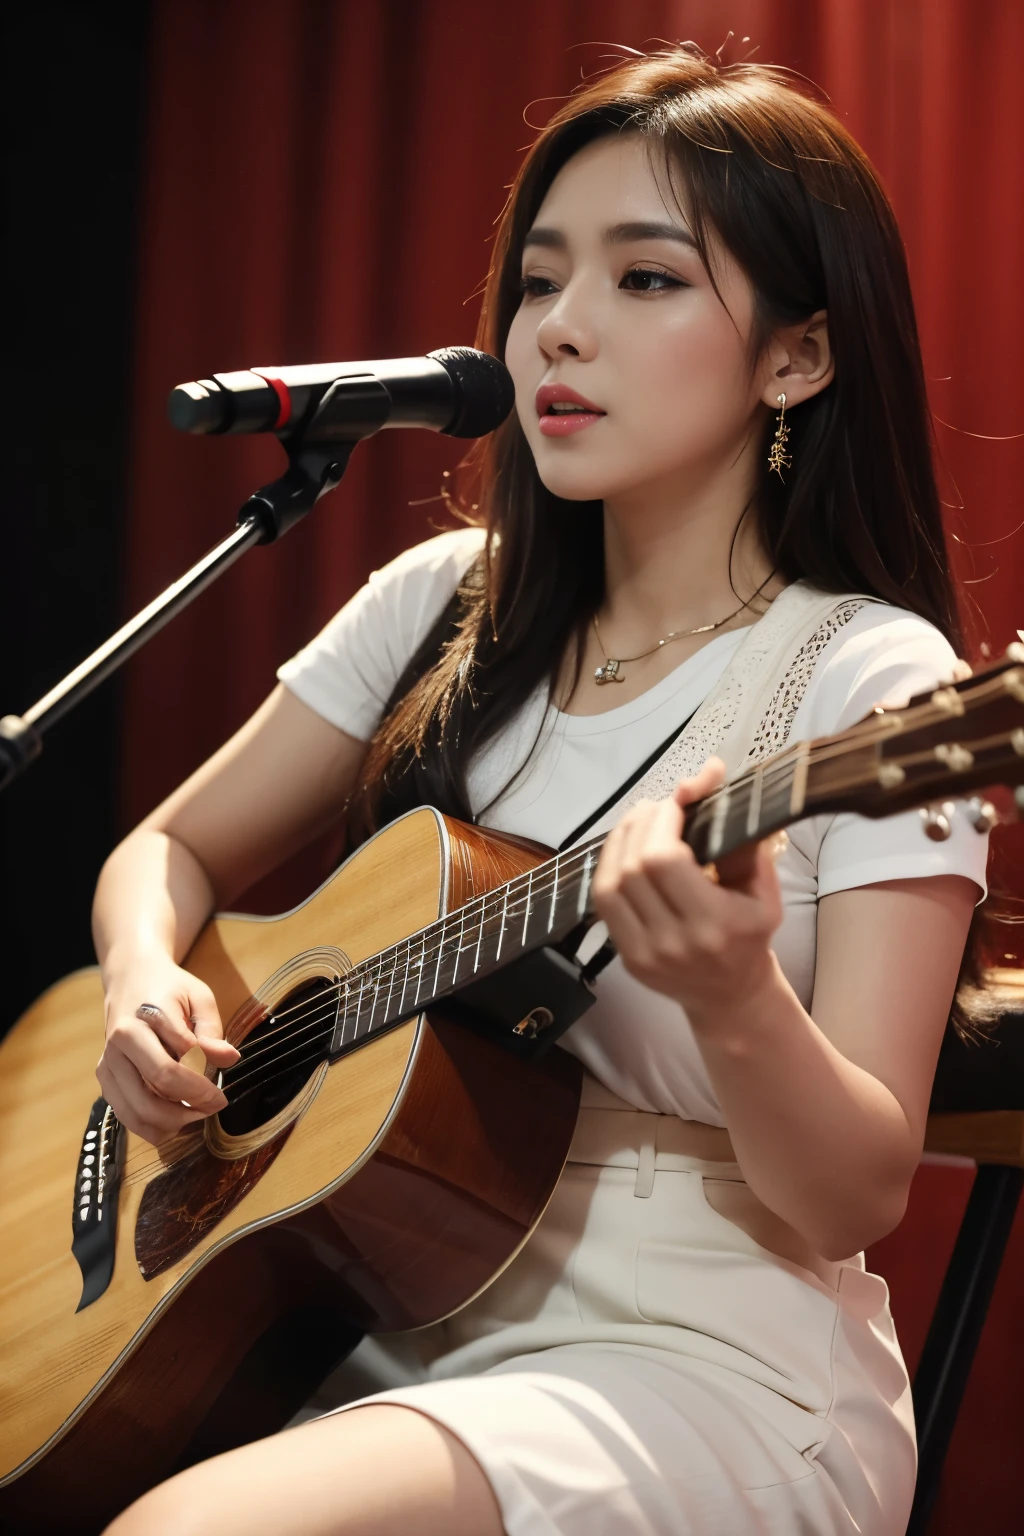 8k, highest quality, ultra details, Indonesian singer named Sella, music, performance, acoustic guitar, intimate setting, soulful voice, emotional performance.